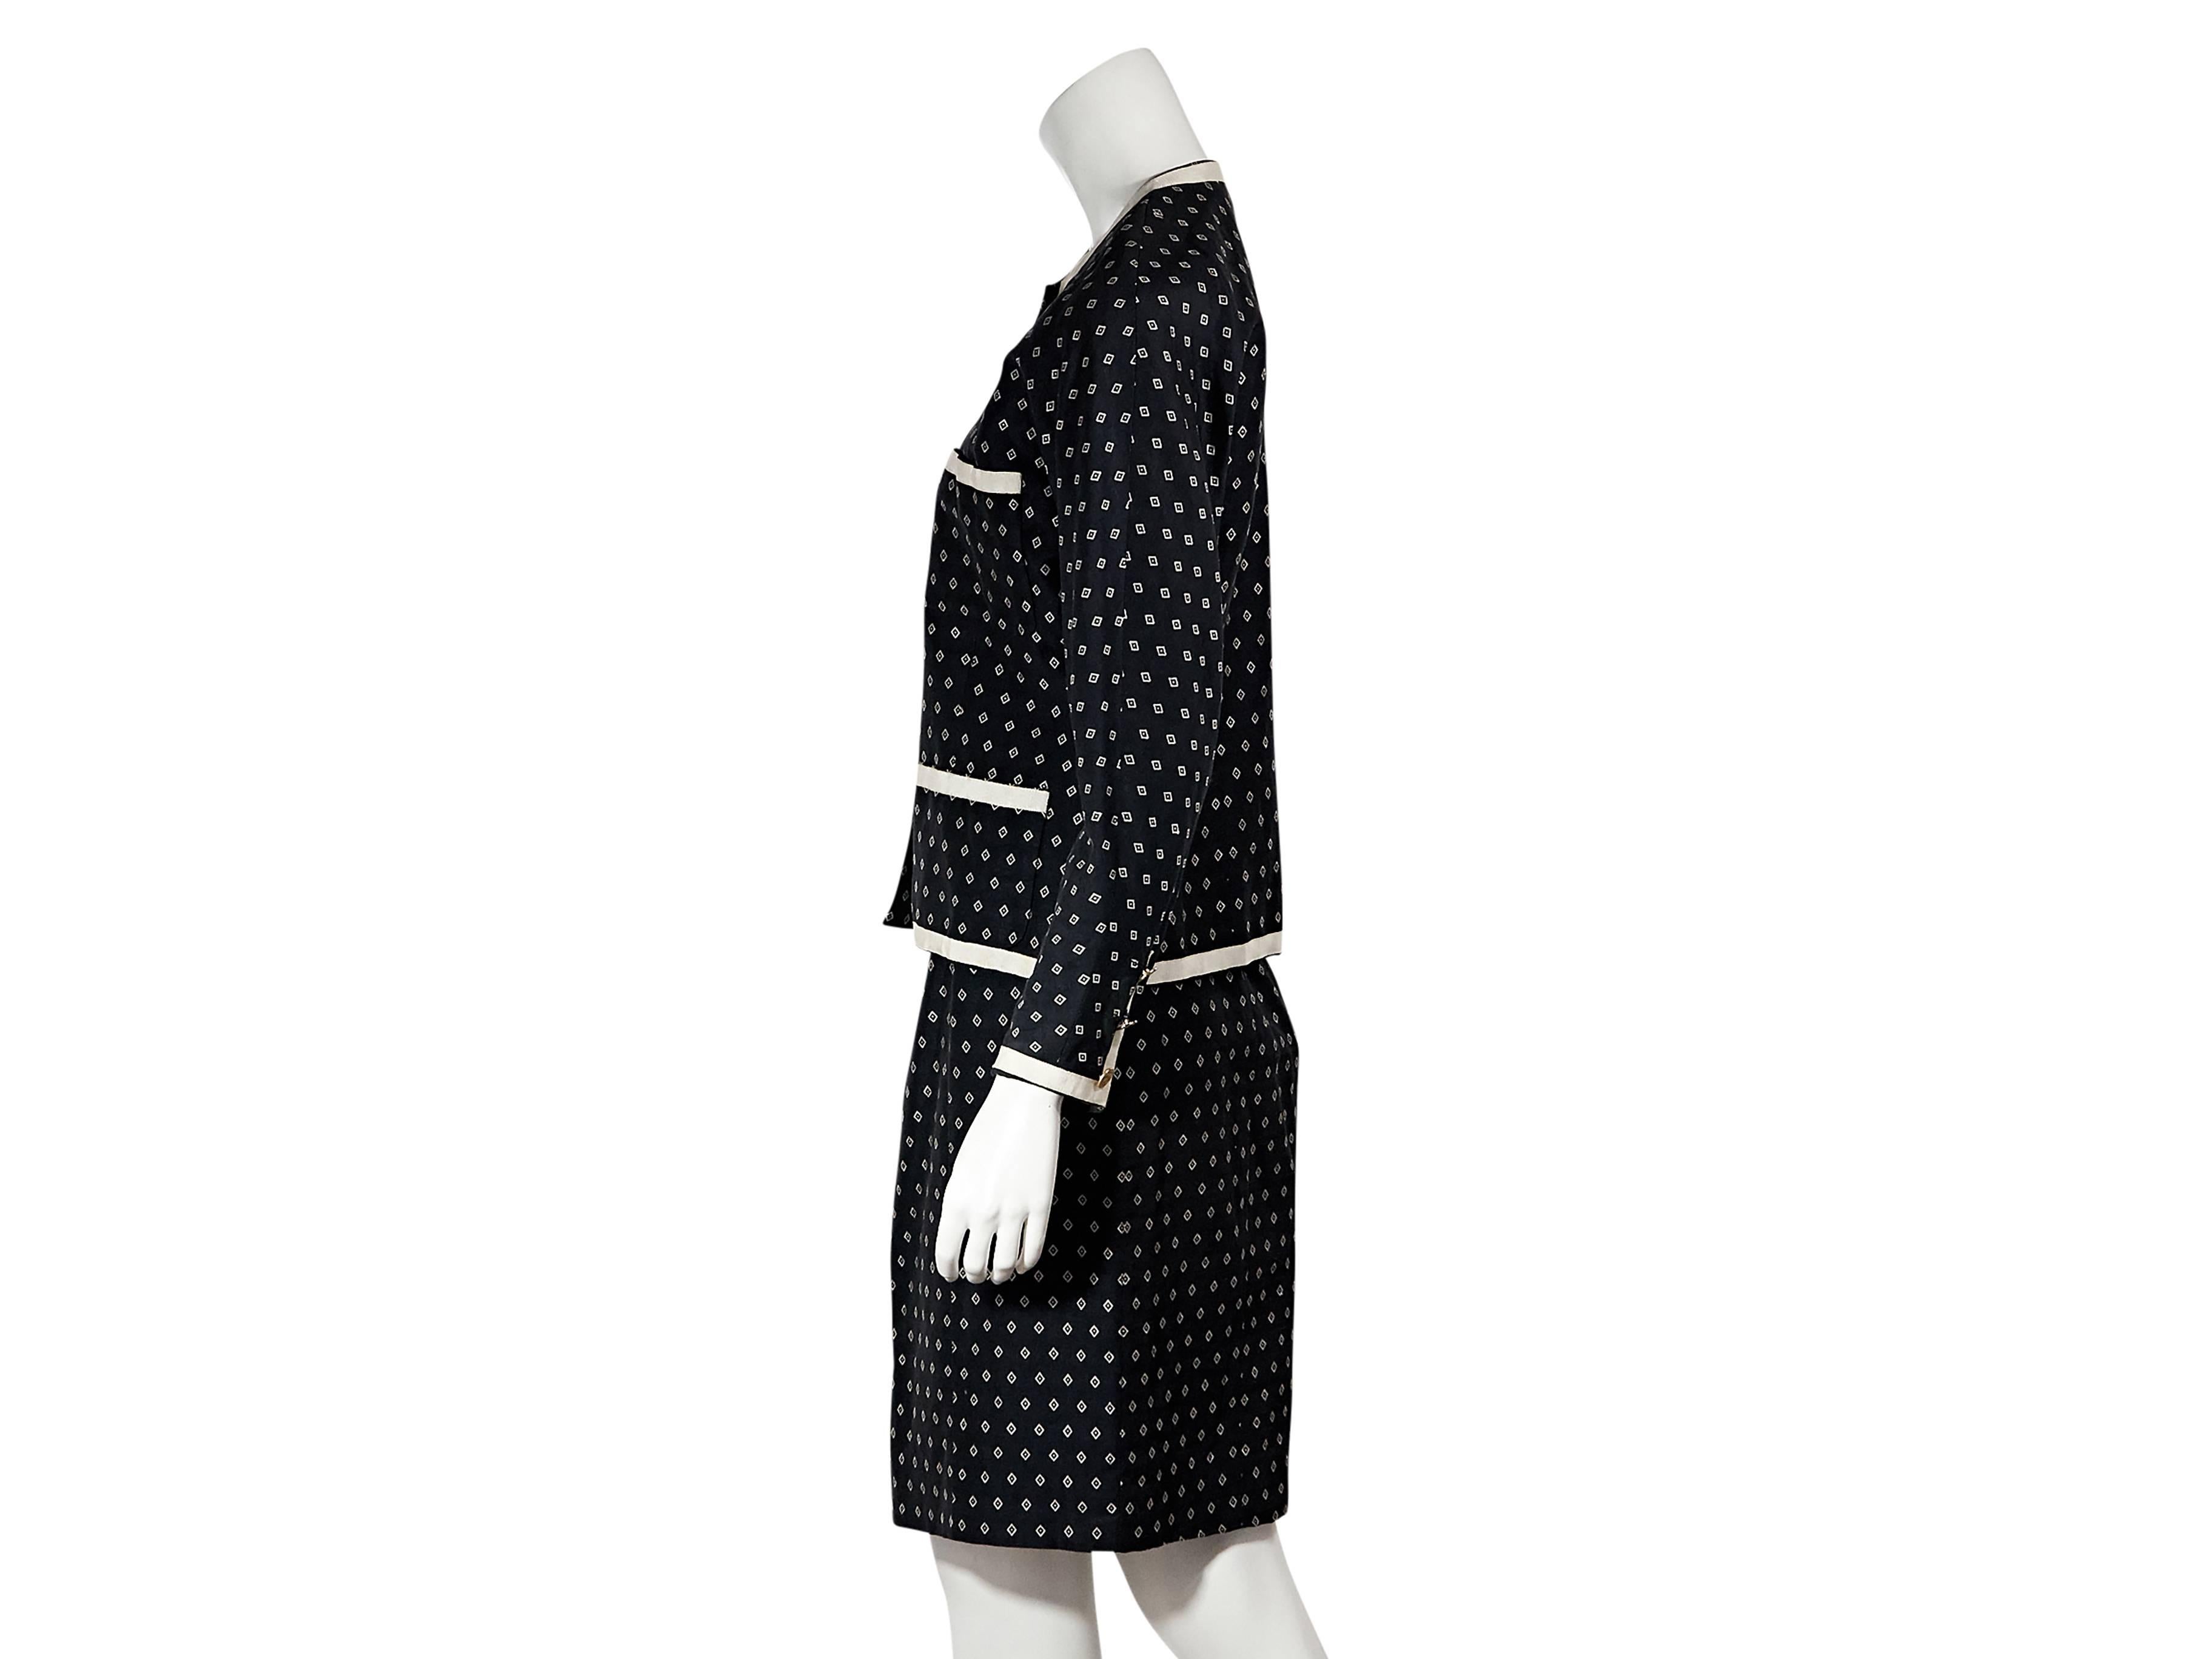 Product details: Vintage navy and white diamond printed skirt suit by Chanel. Crewneck. Long sleeves. Button-front closure. Front patch pockets. Matching pencil skirt. Concealed back zip closure. 
Condition: Very good. 
Est. Retail $ 1,628.00